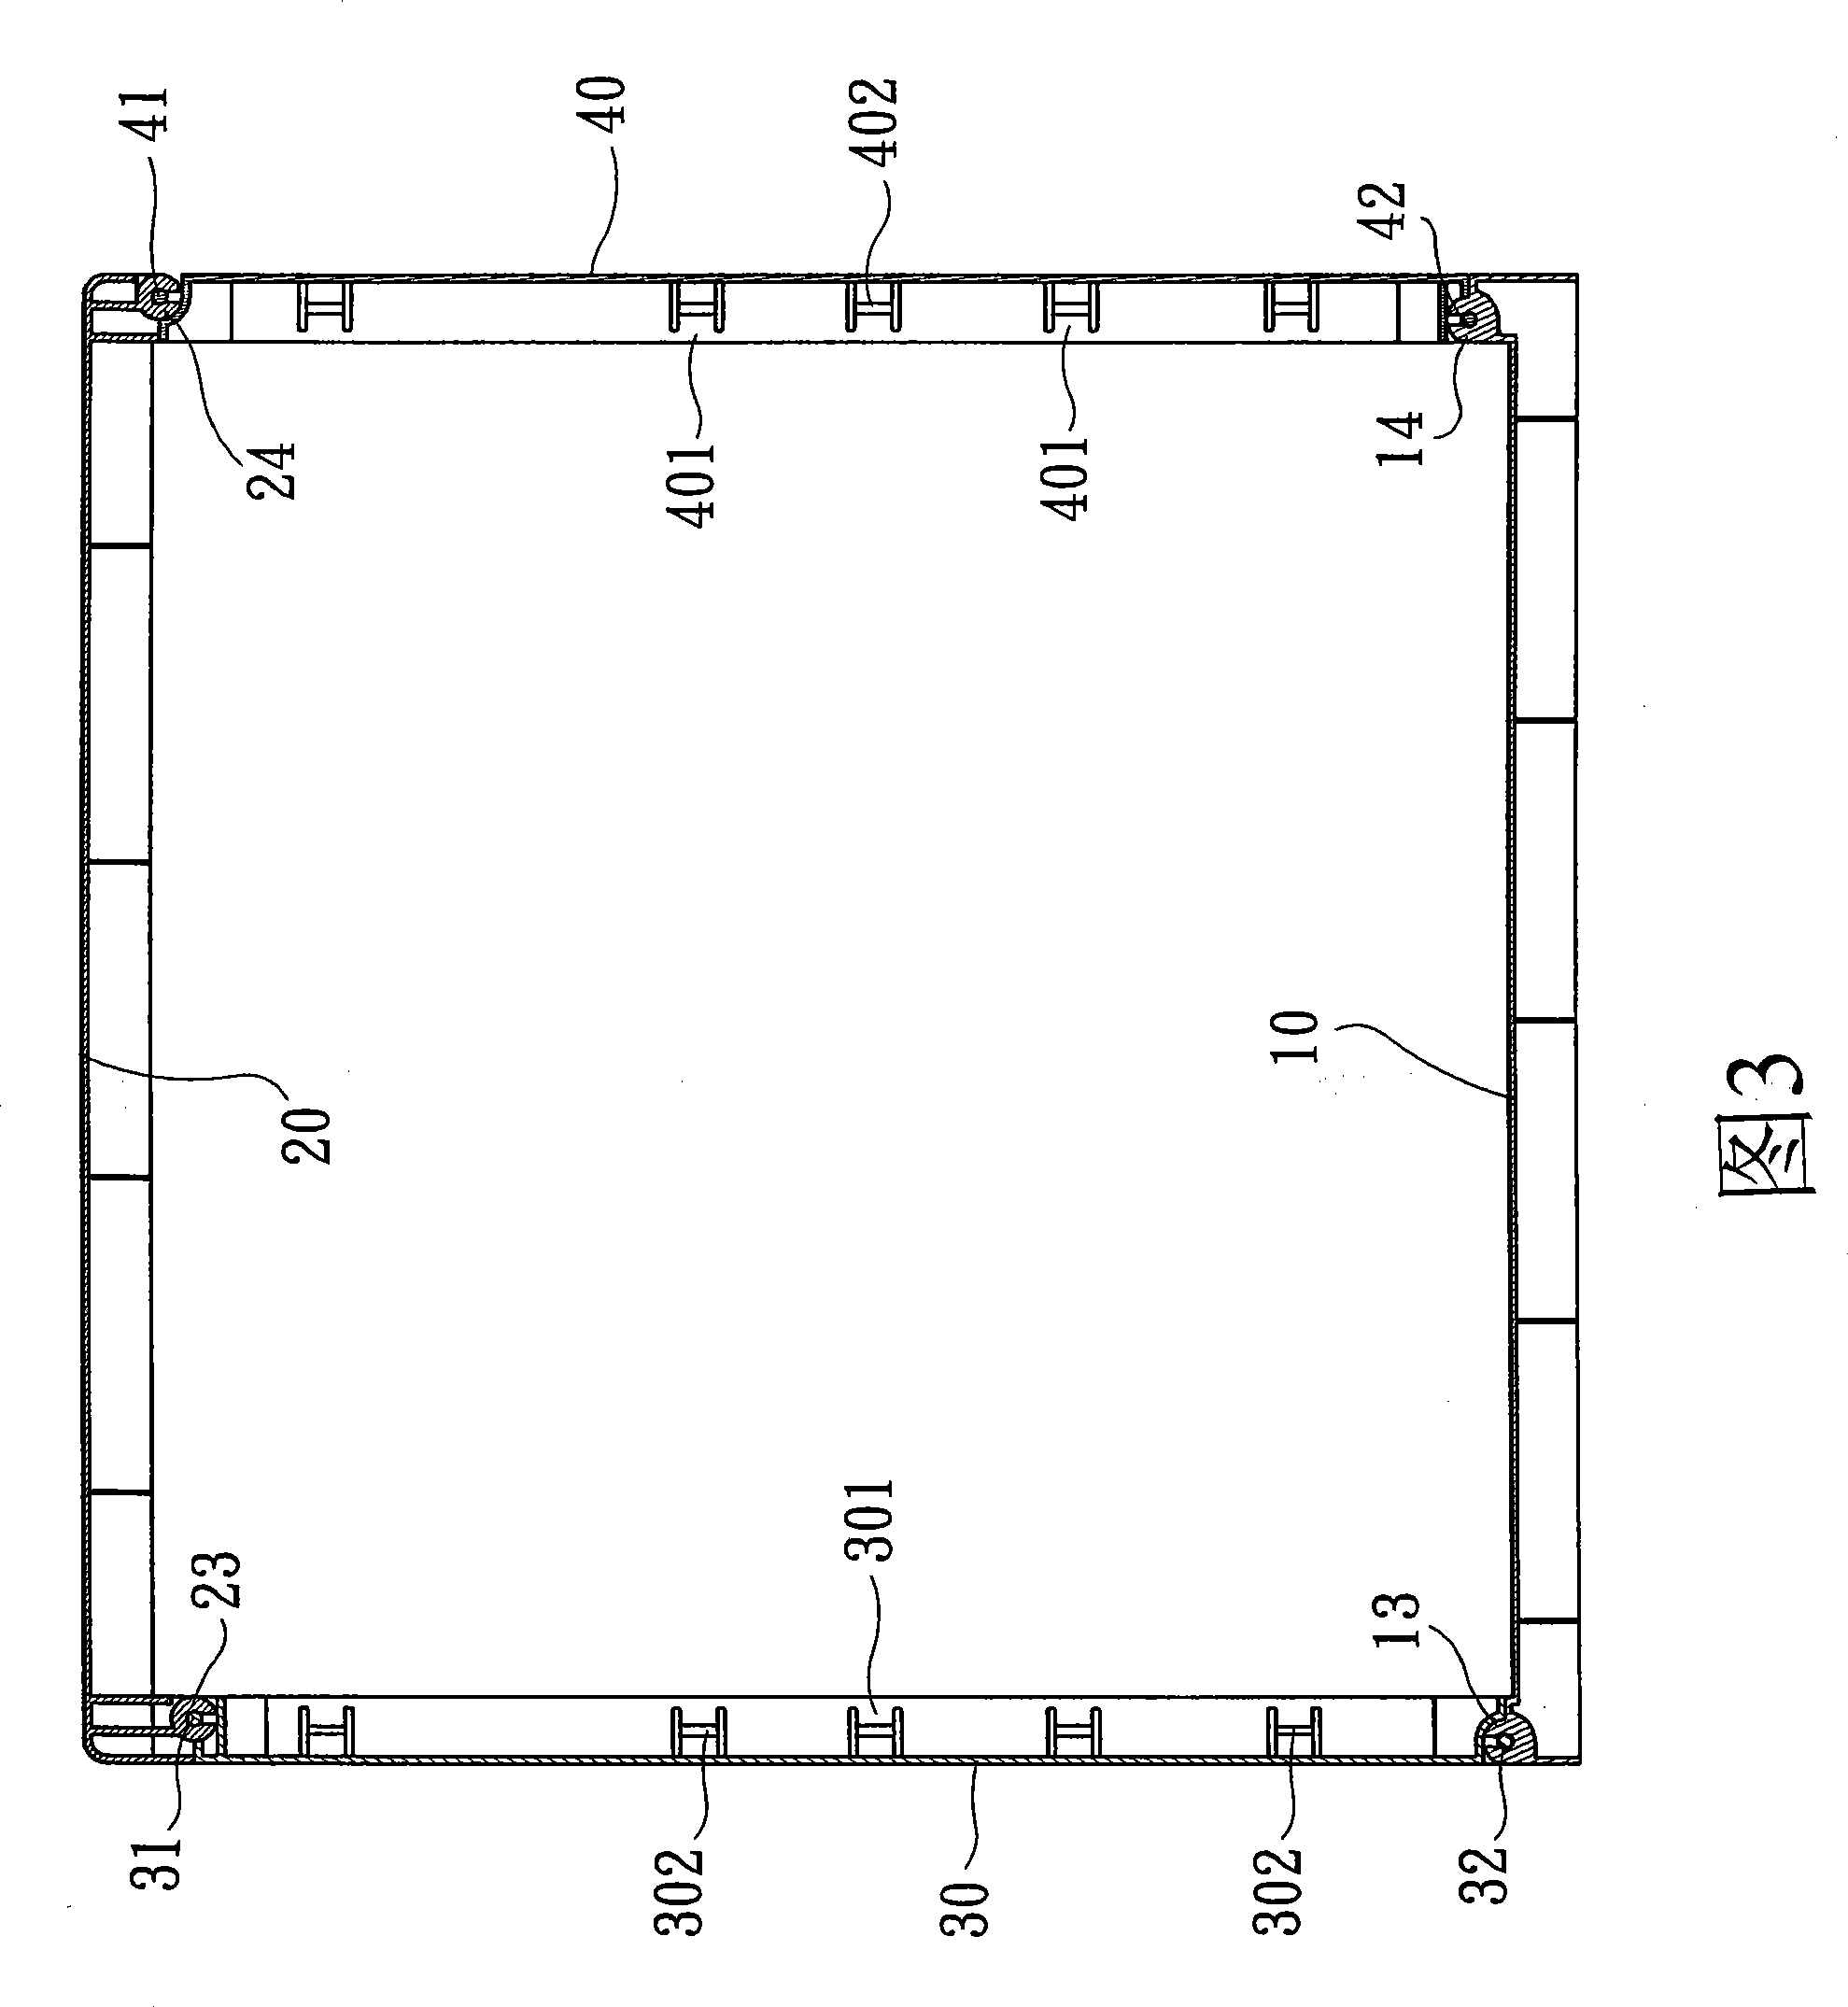 Foldable containing apparatus